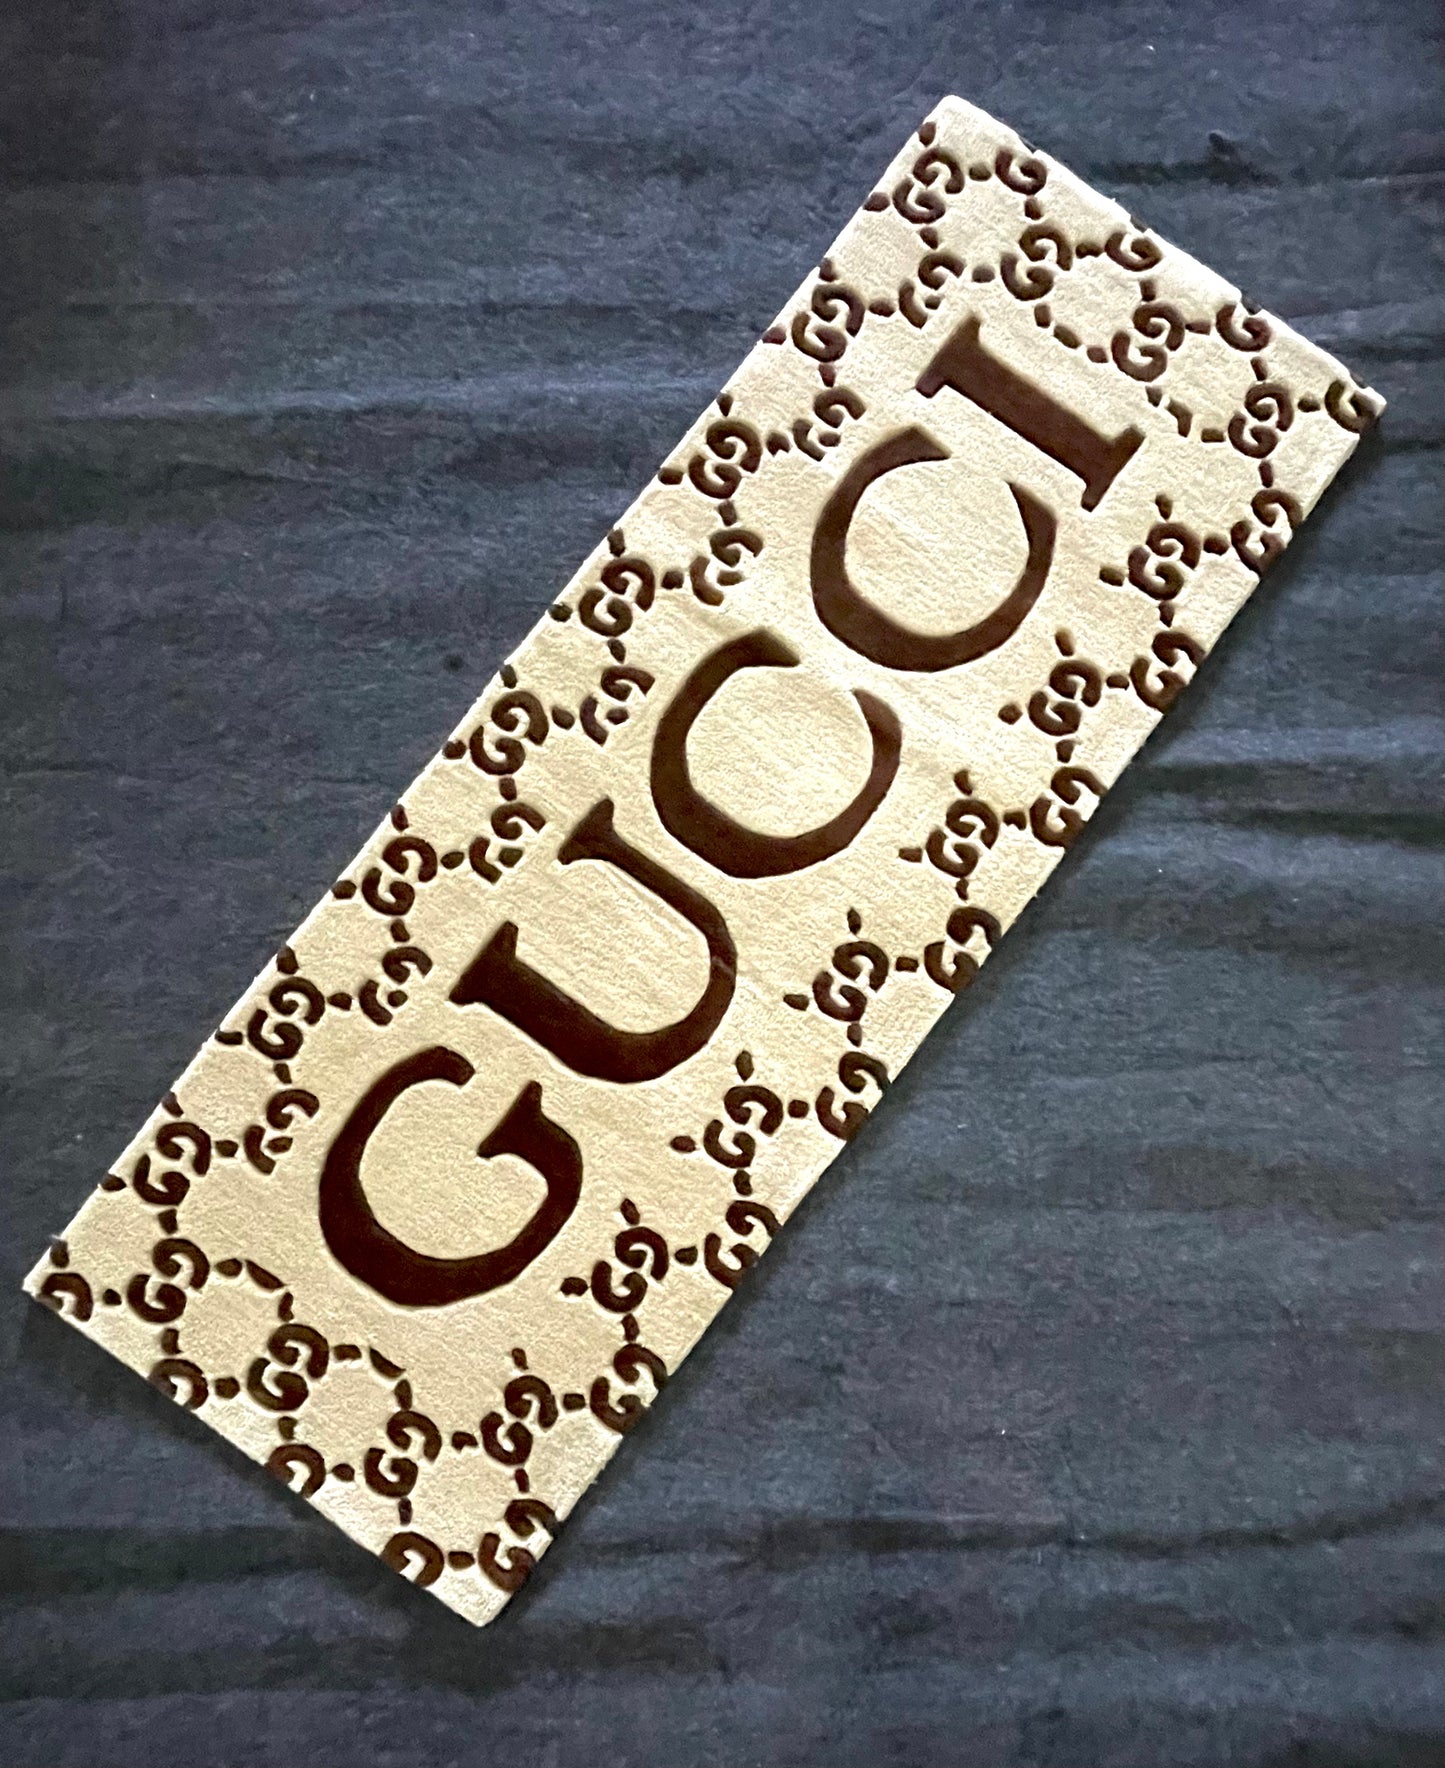 Gucci Brand Hand-Tufted Rug